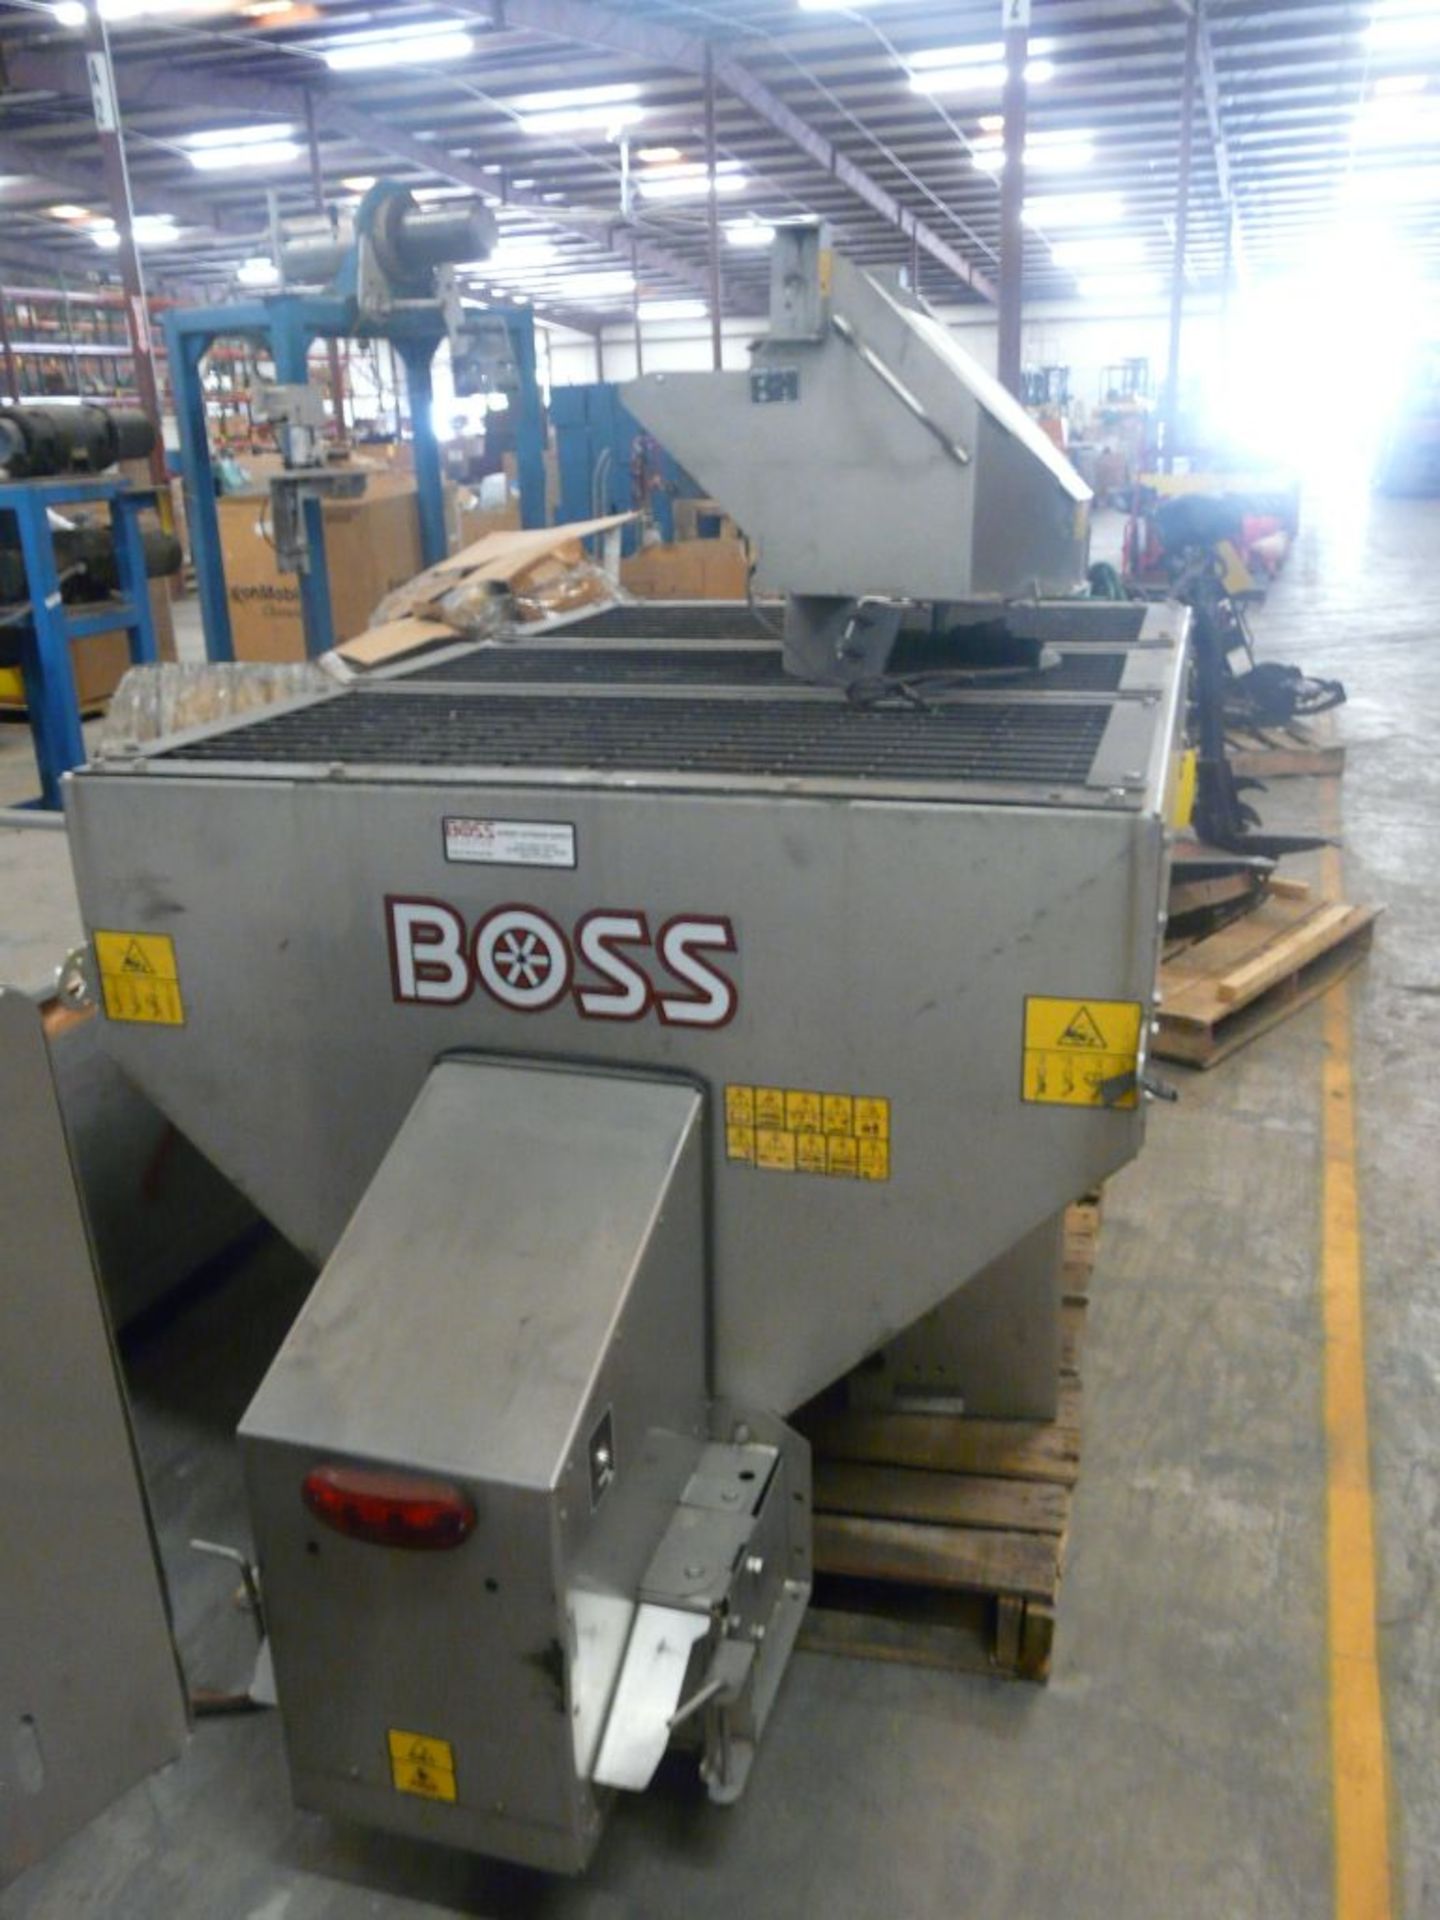 Boss Forge 2.0 Forge 2.0 Stainless Steel V-Box Auger Salt Spreader - Part No. VBS17100; Tag: 214766 - Image 2 of 5